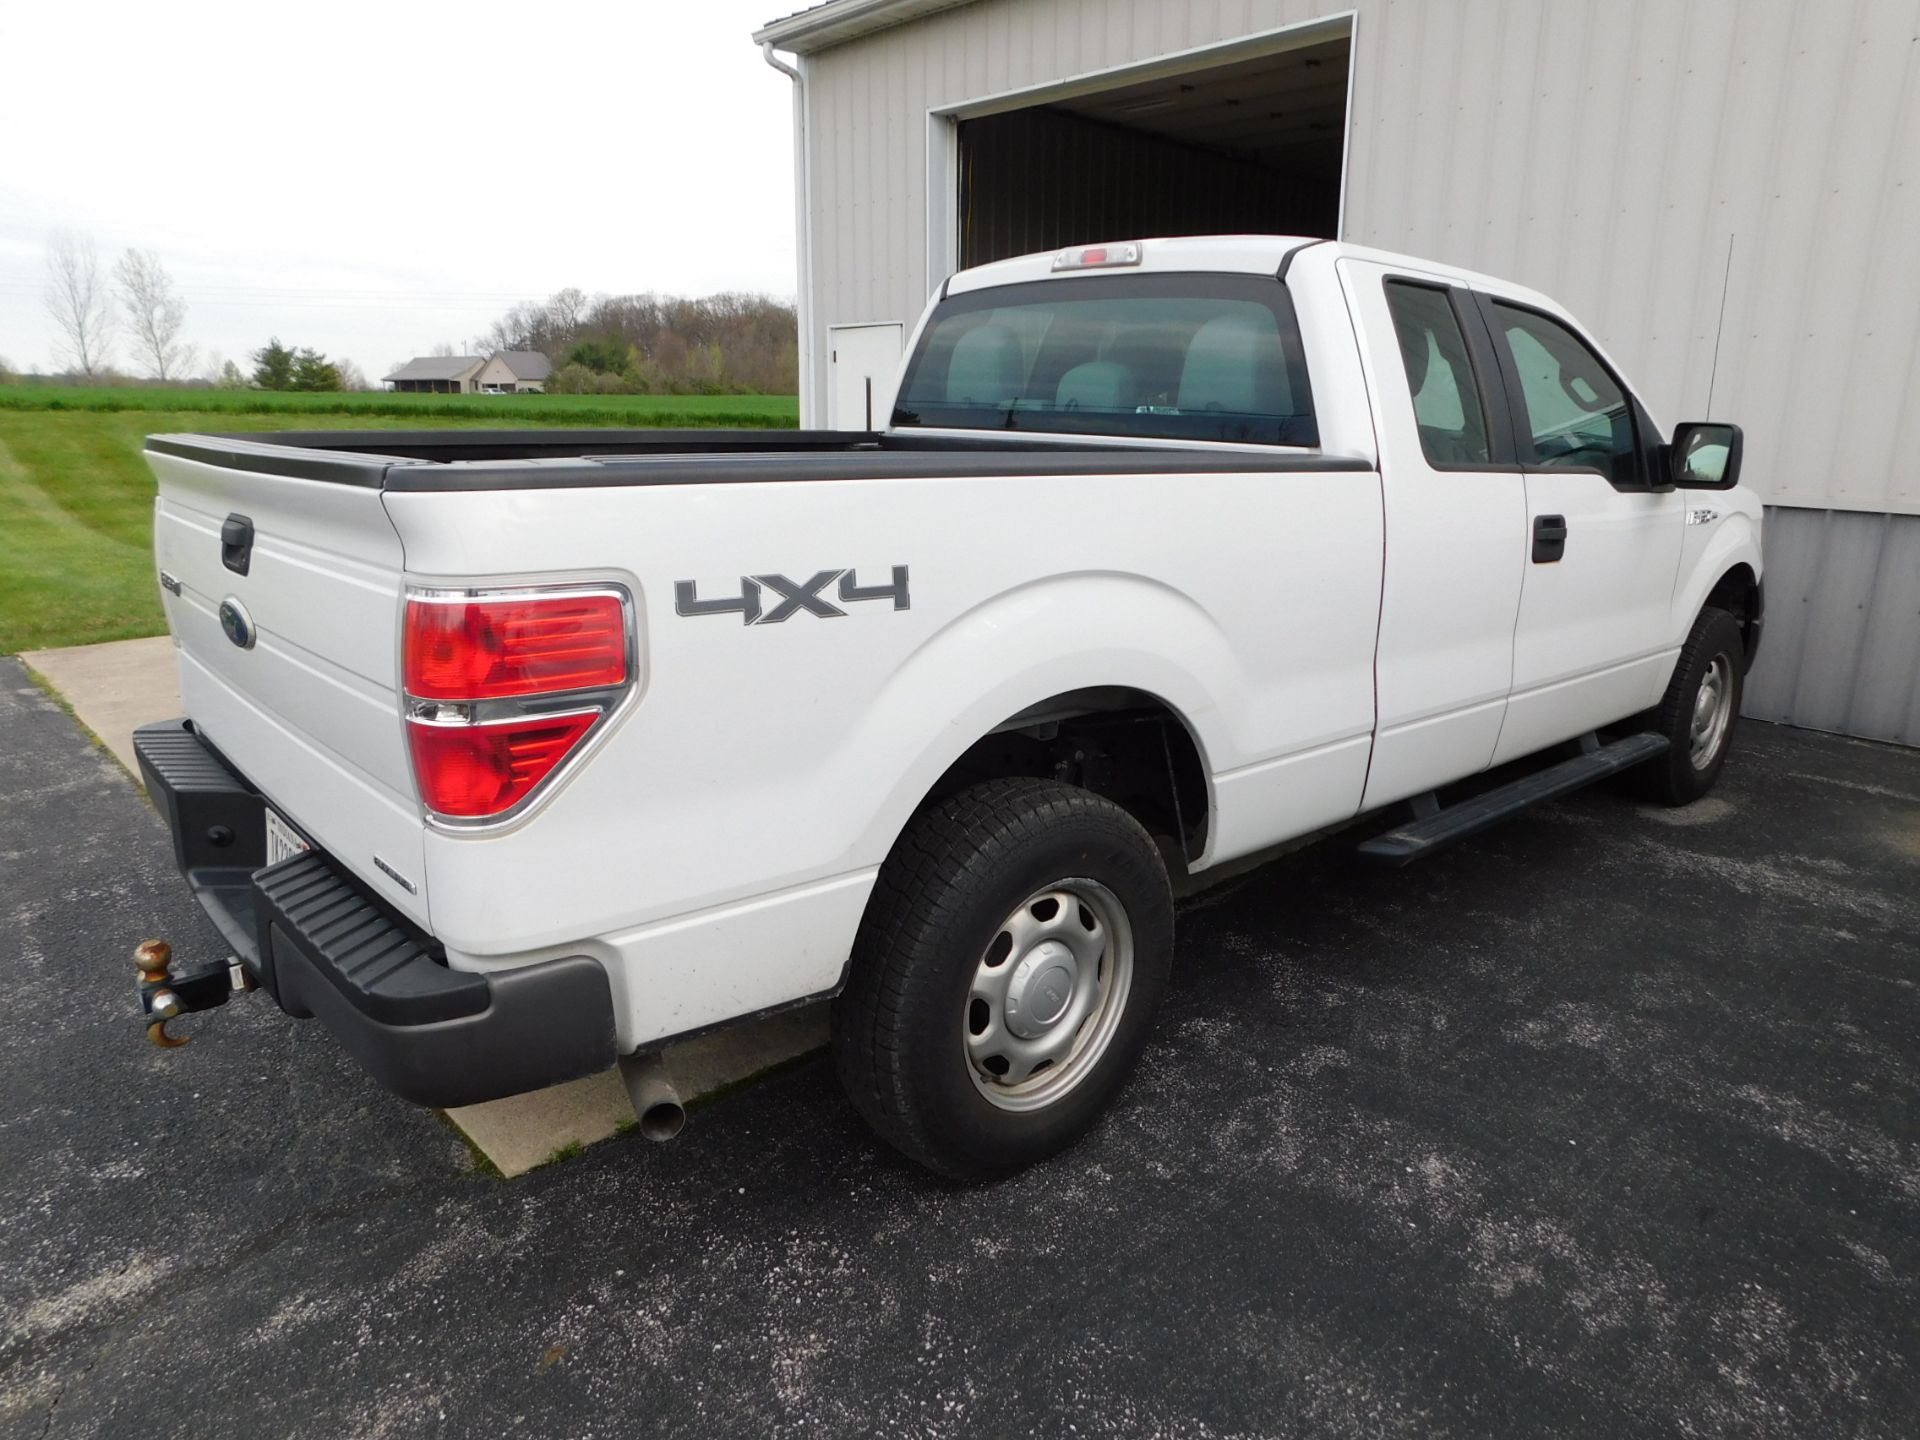 2012 Ford F-150XL Pickup VIN 1FTEX1EM1CFB57282, 4WD, Extended Cab, Automatic, AC< PW - Image 4 of 37